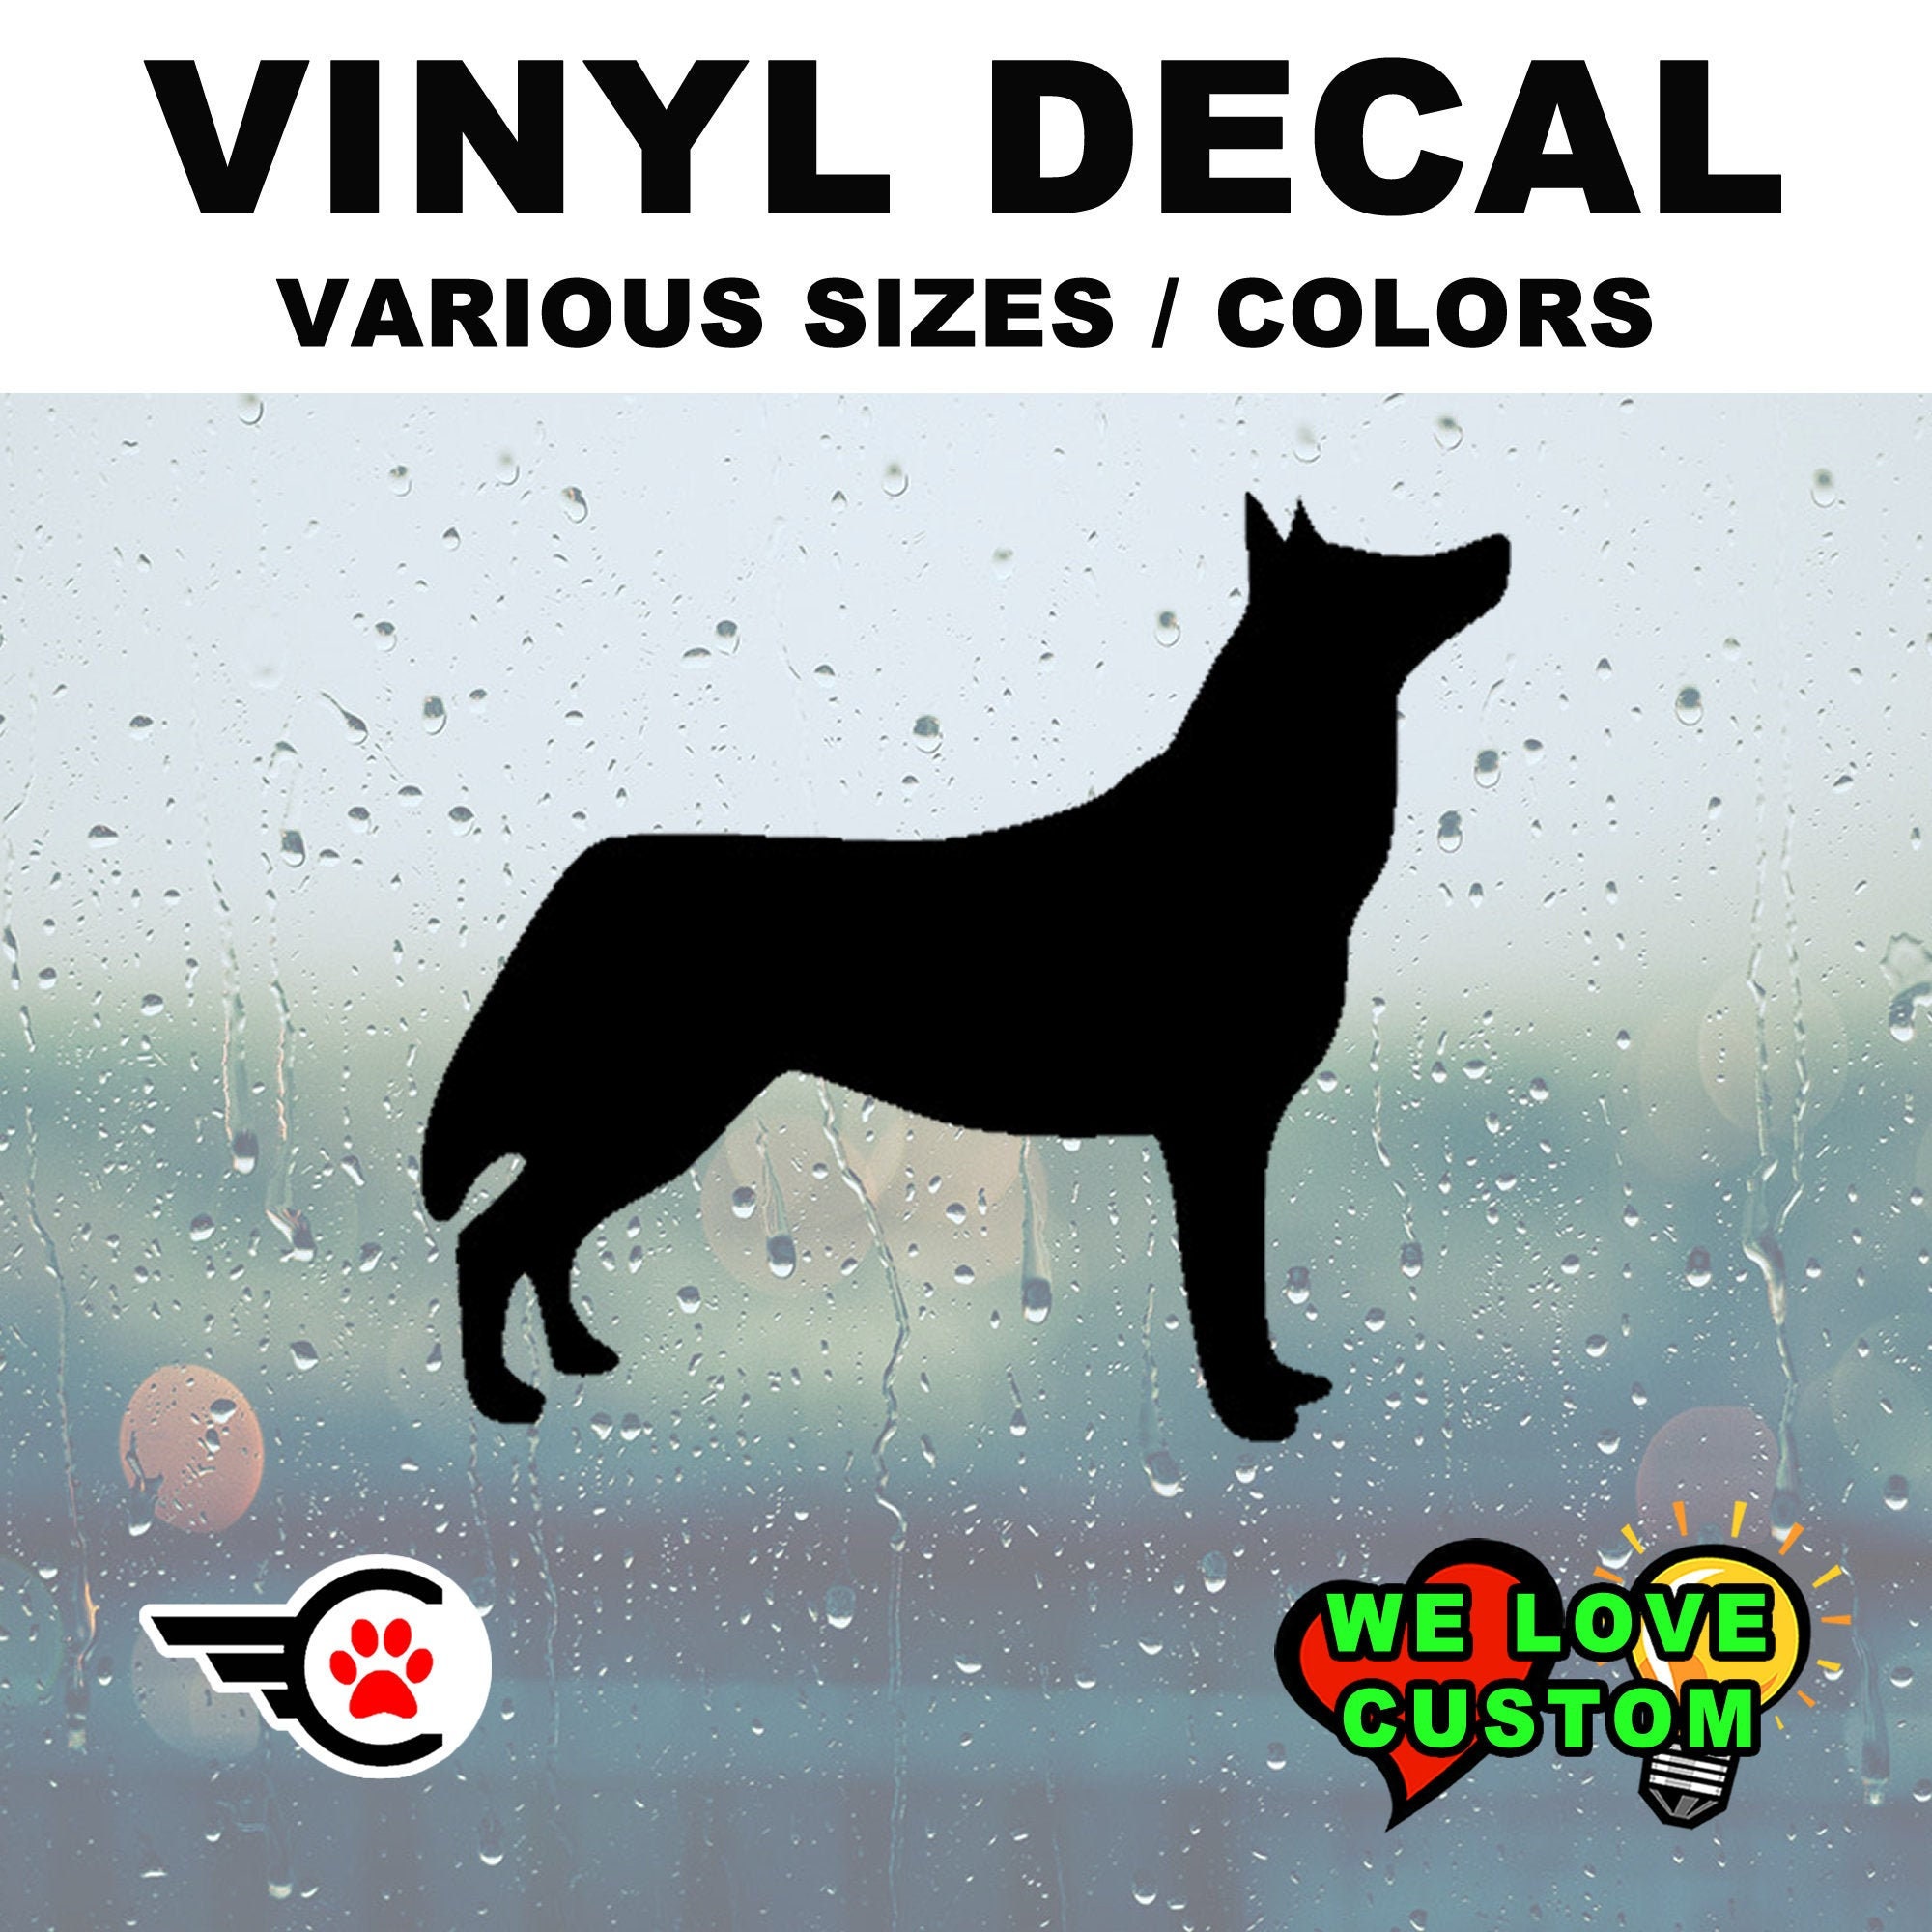 Husky Silhouette Vinyl Decal Various Sizes and Colors Die Cut Vinyl Decal also in Cool Chrome Colors!